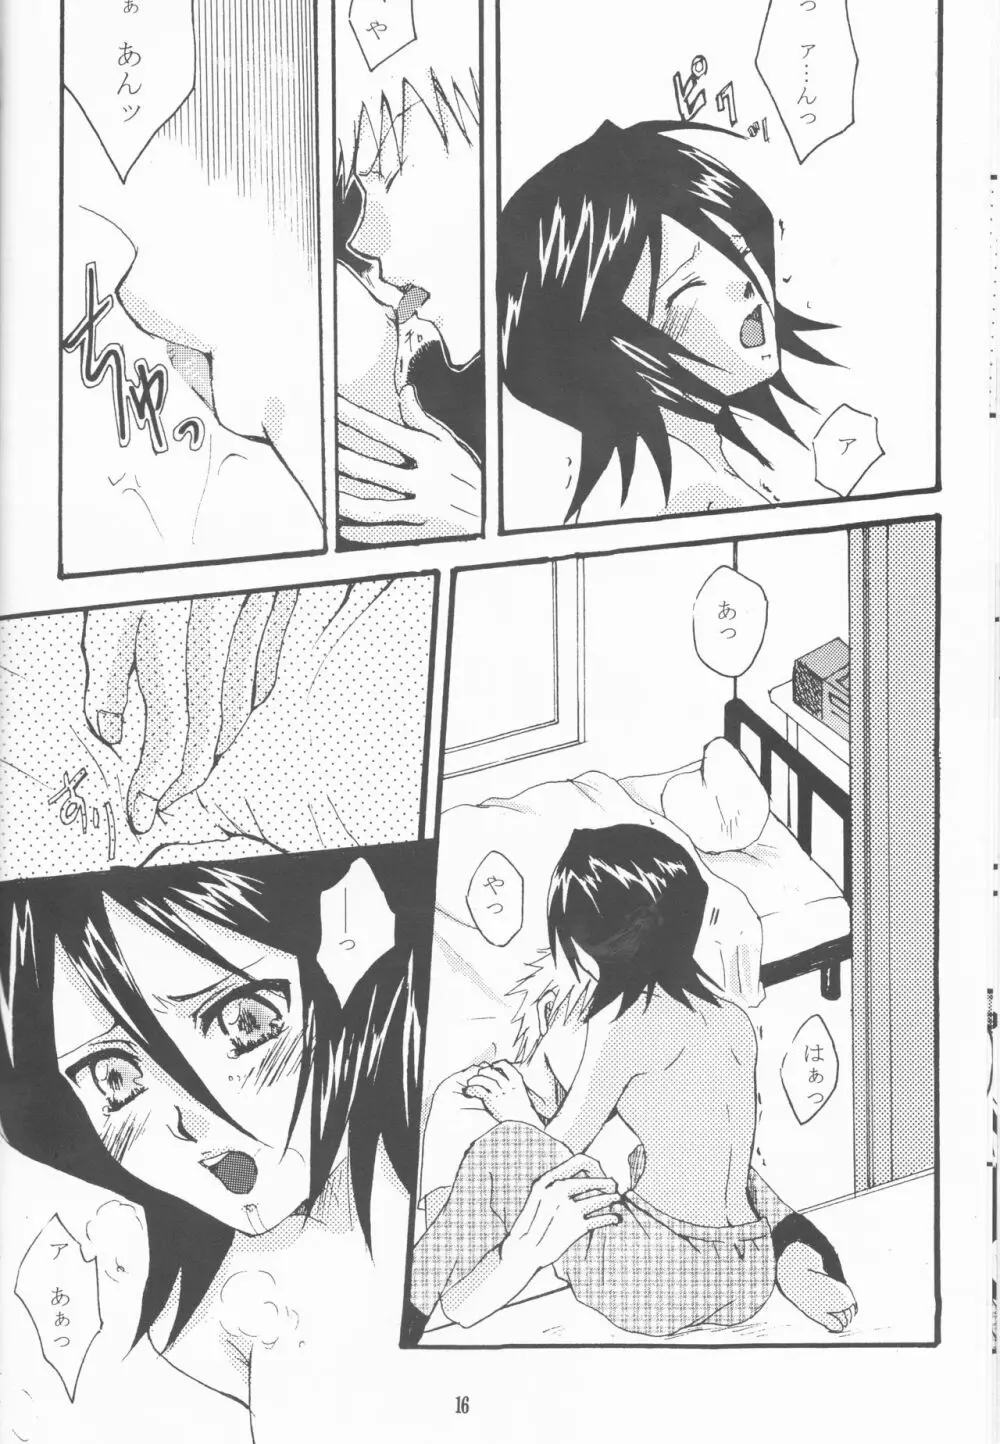 Neo Melodramatic 2][bleach) - page16